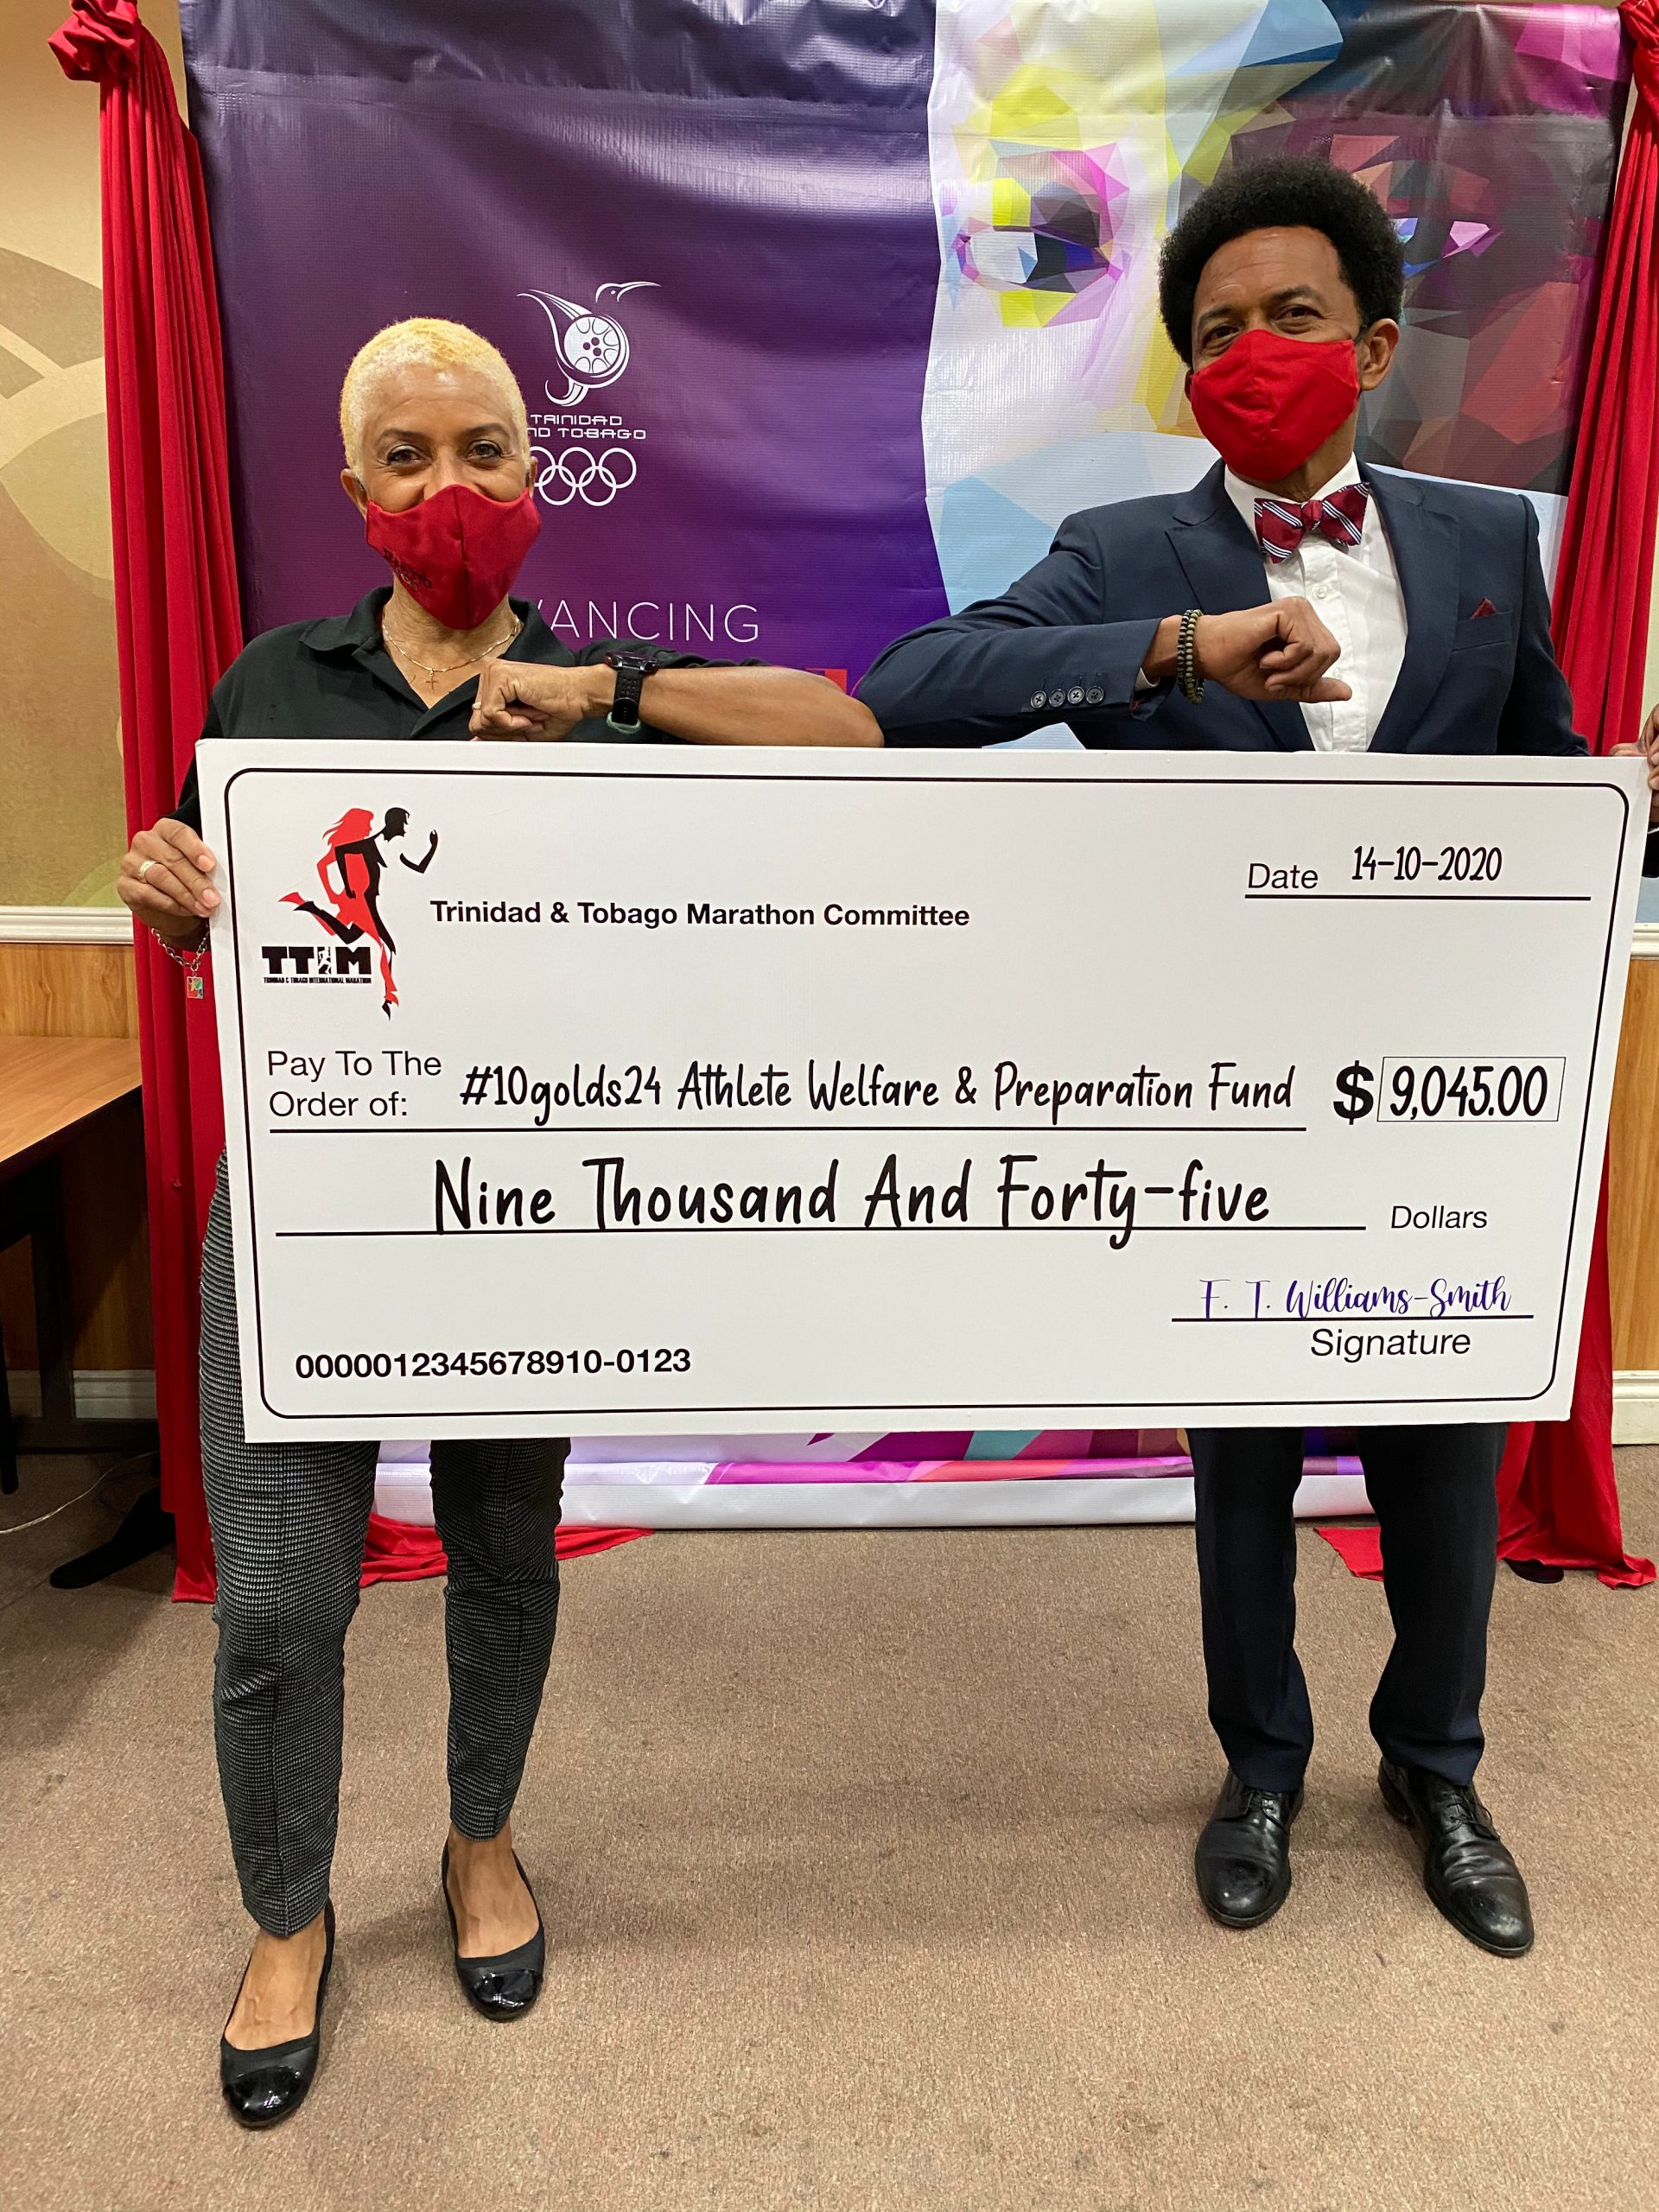 The Trinidad and Tobago Marathon Committee (TTMC) is pleased to close on our charitable obligations in presenting a cheque for $9,045.00 to Mr. Brian Lewis, President of the Trinidad and Tobago Olympic Committee (TTOC) for the #10Golds24 Athlete Welfare & Preparation Fund representing proceeds from the 2020 event